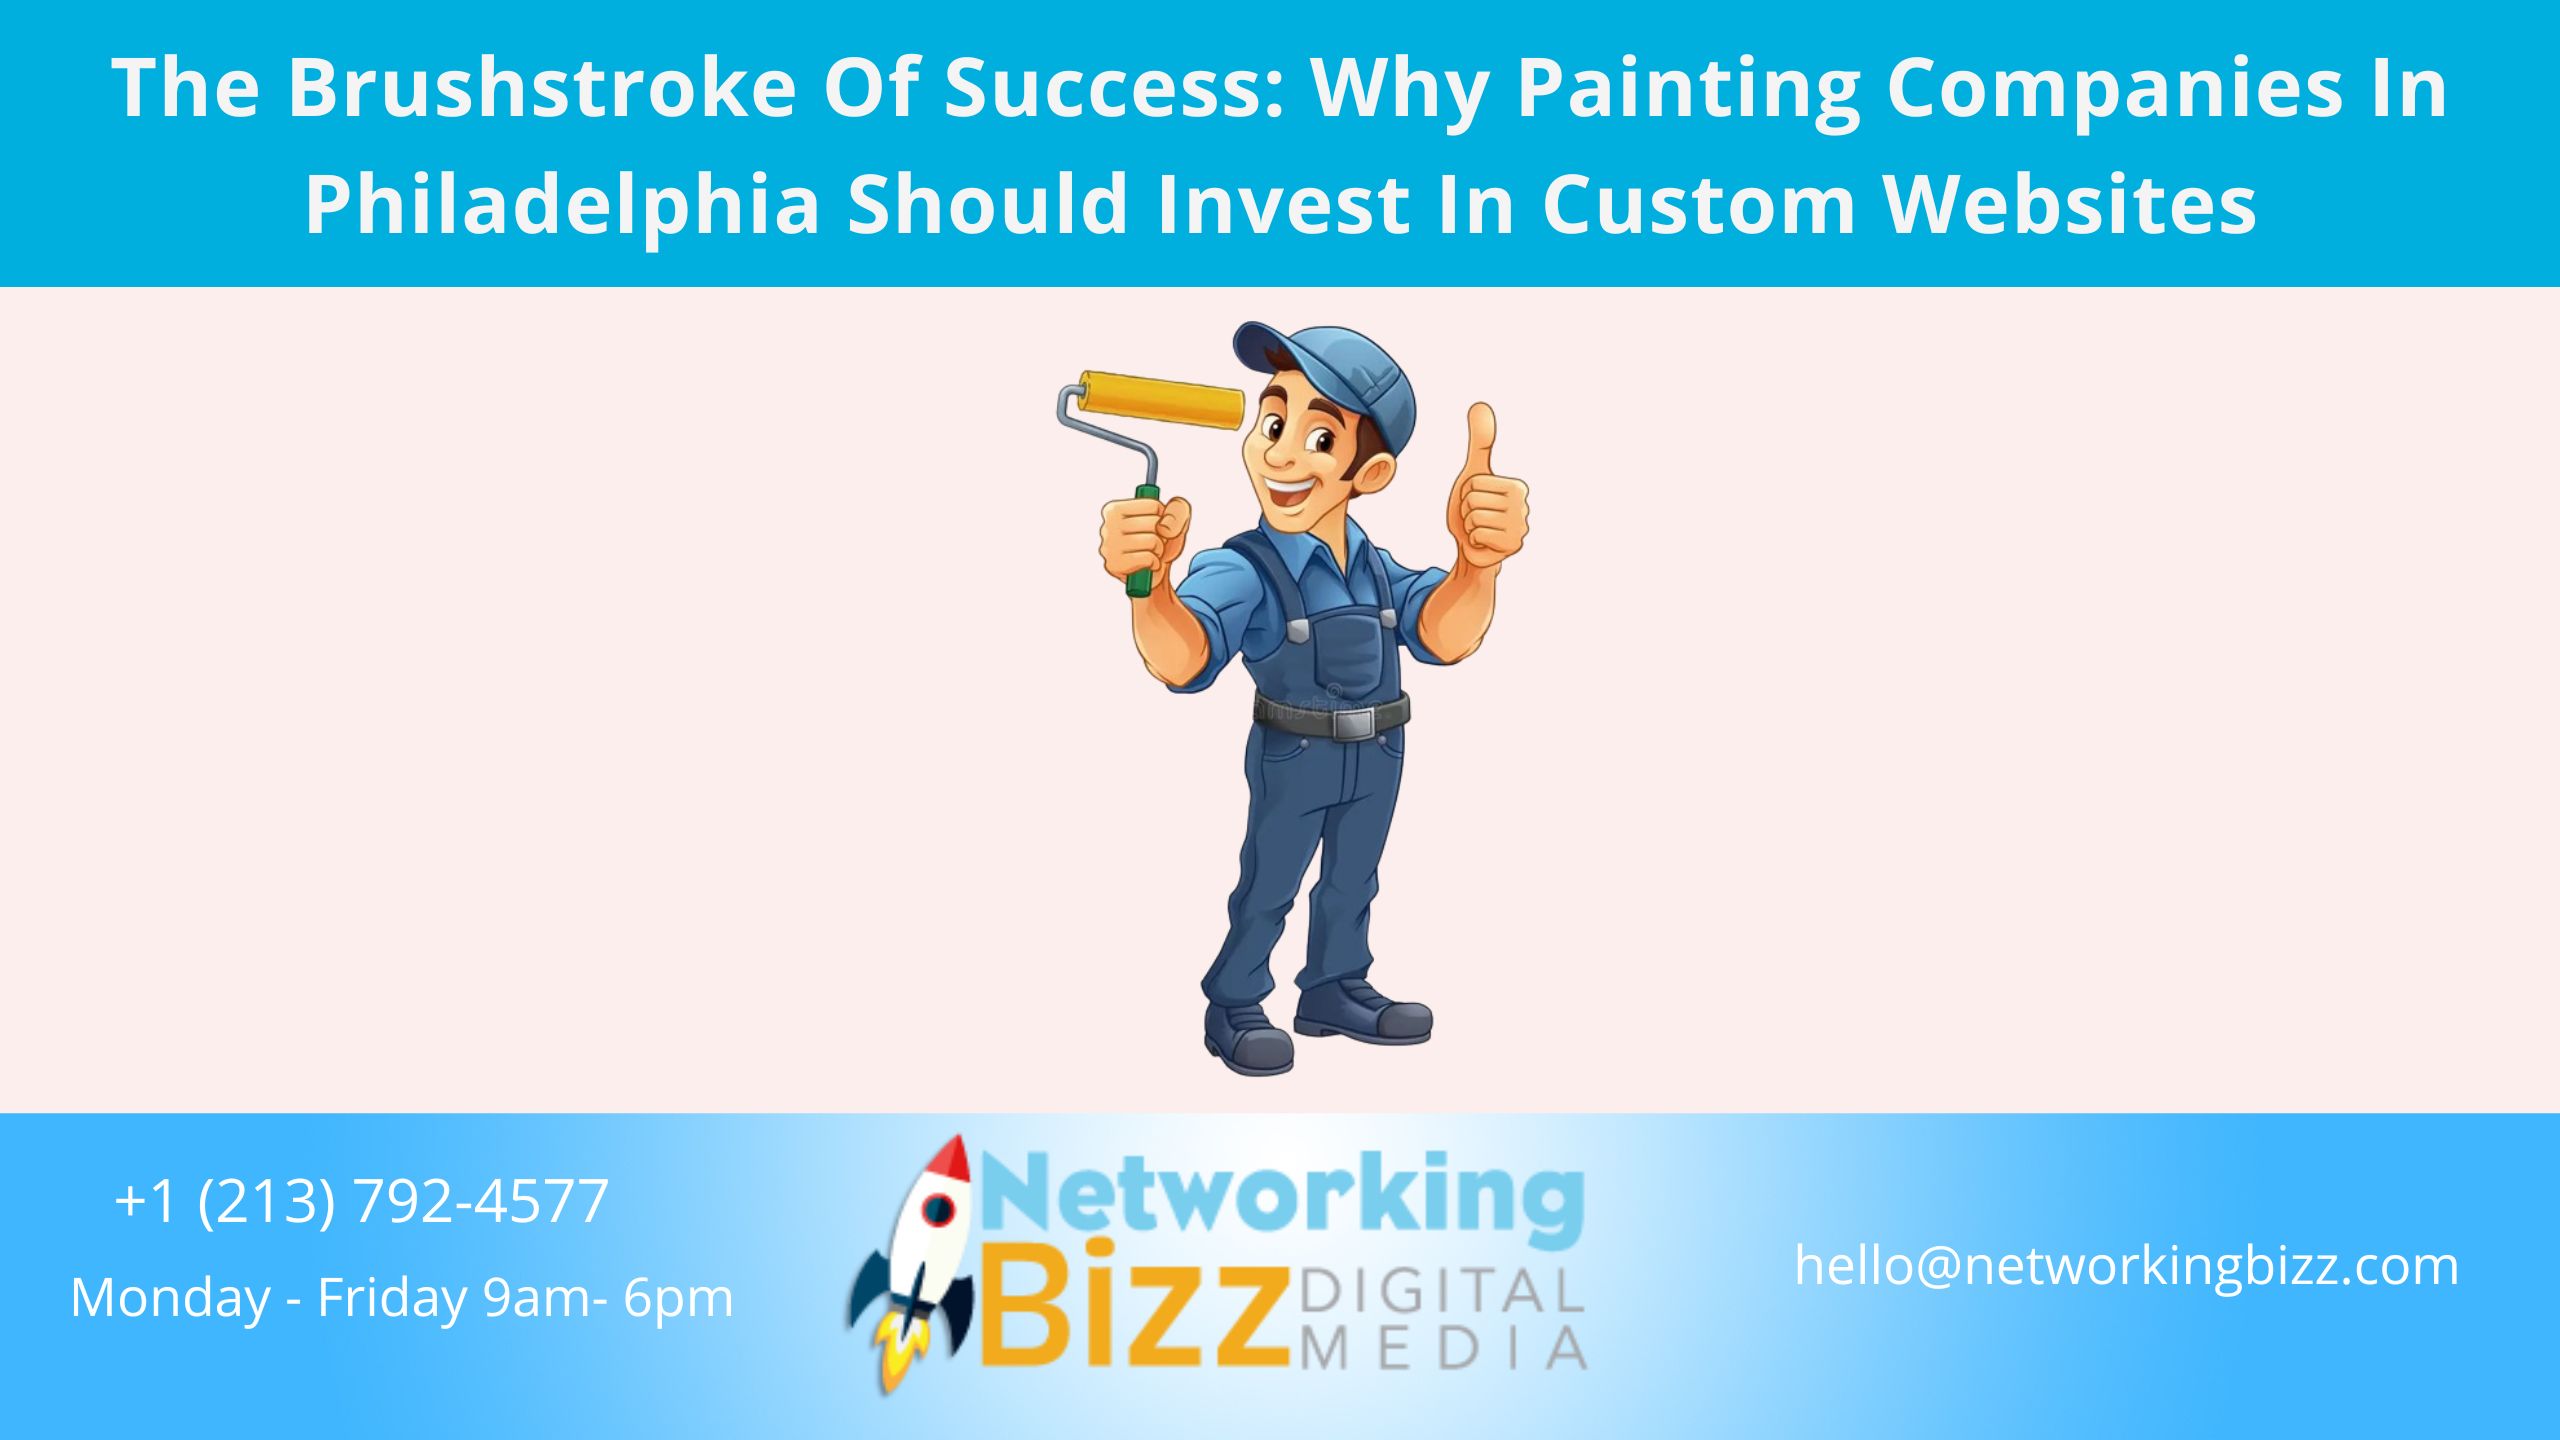 The Brushstroke Of Success: Why Painting Companies In Philadelphia Should Invest In Custom Websites